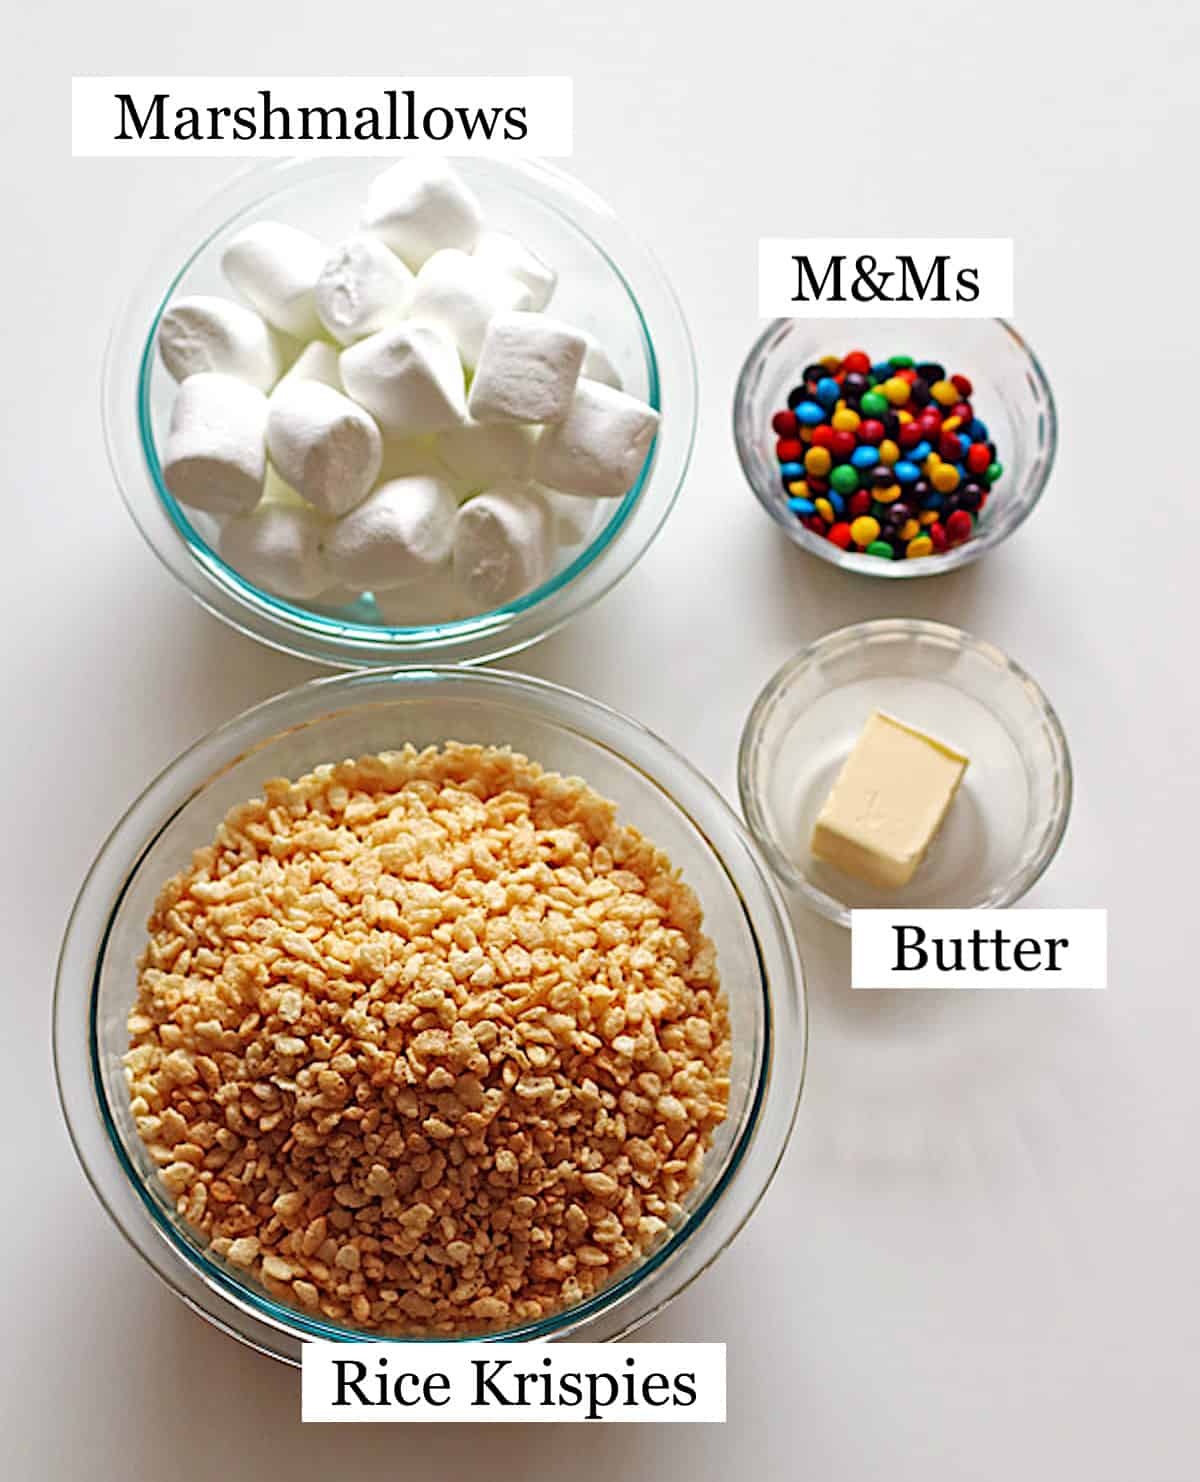 Rice Krispie cereal, marshmallows, M&M candy and butter in four separate clear bowls